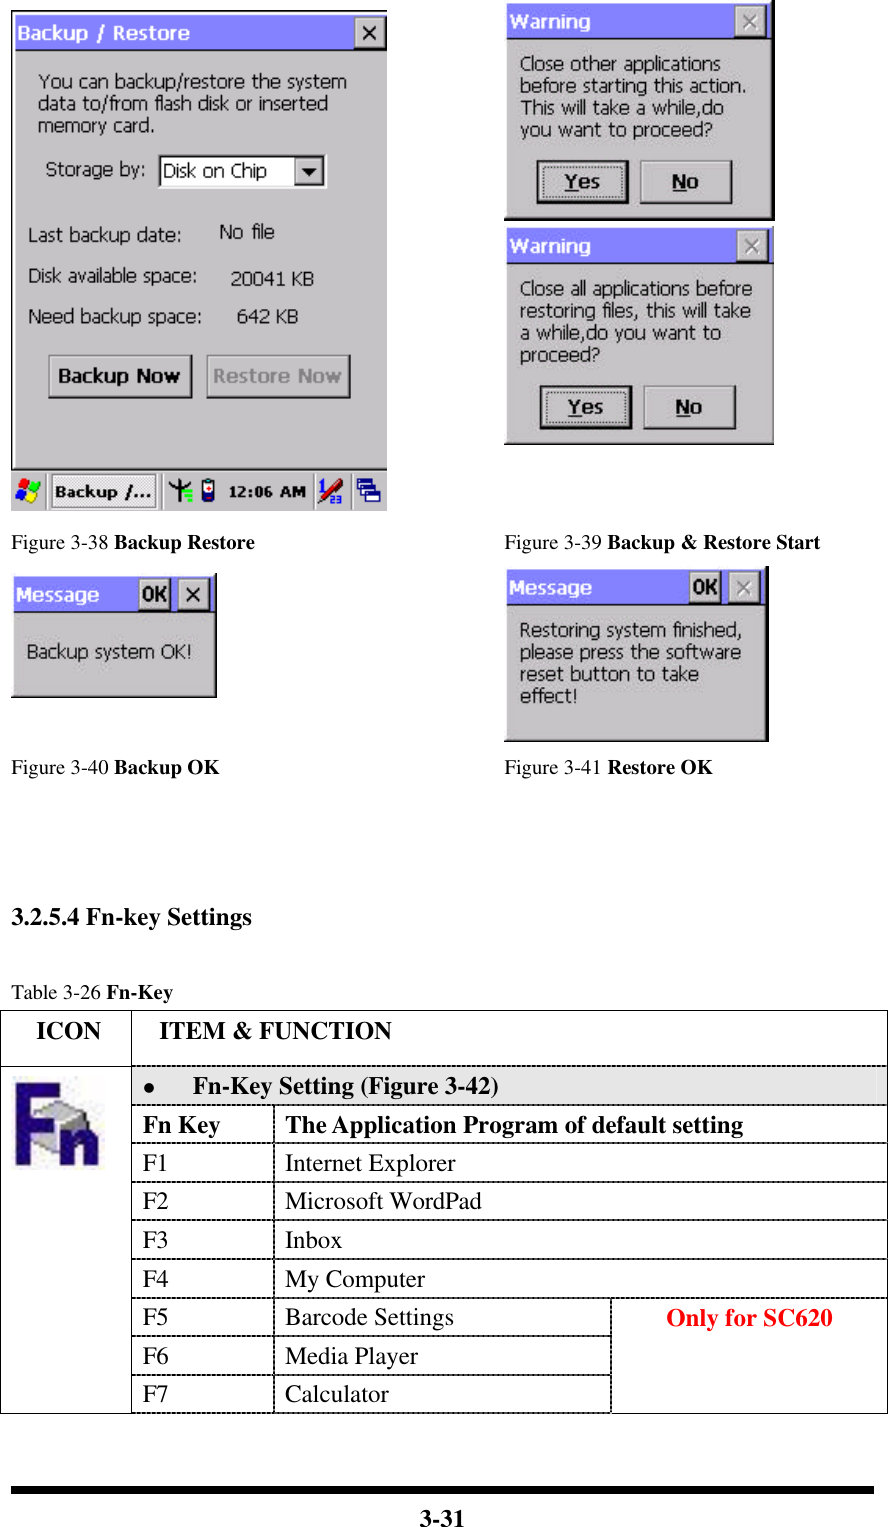  3-31    Figure 3-38 Backup Restore Figure 3-39 Backup &amp; Restore Start   Figure 3-40 Backup OK Figure 3-41 Restore OK    3.2.5.4 Fn-key Settings  Table 3-26 Fn-Key   ICON  ITEM &amp; FUNCTION l Fn-Key Setting (Figure 3-42) Fn Key The Application Program of default setting F1 Internet Explorer F2 Microsoft WordPad F3 Inbox F4 My Computer F5 Barcode Settings F6 Media Player  F7 Calculator Only for SC620 